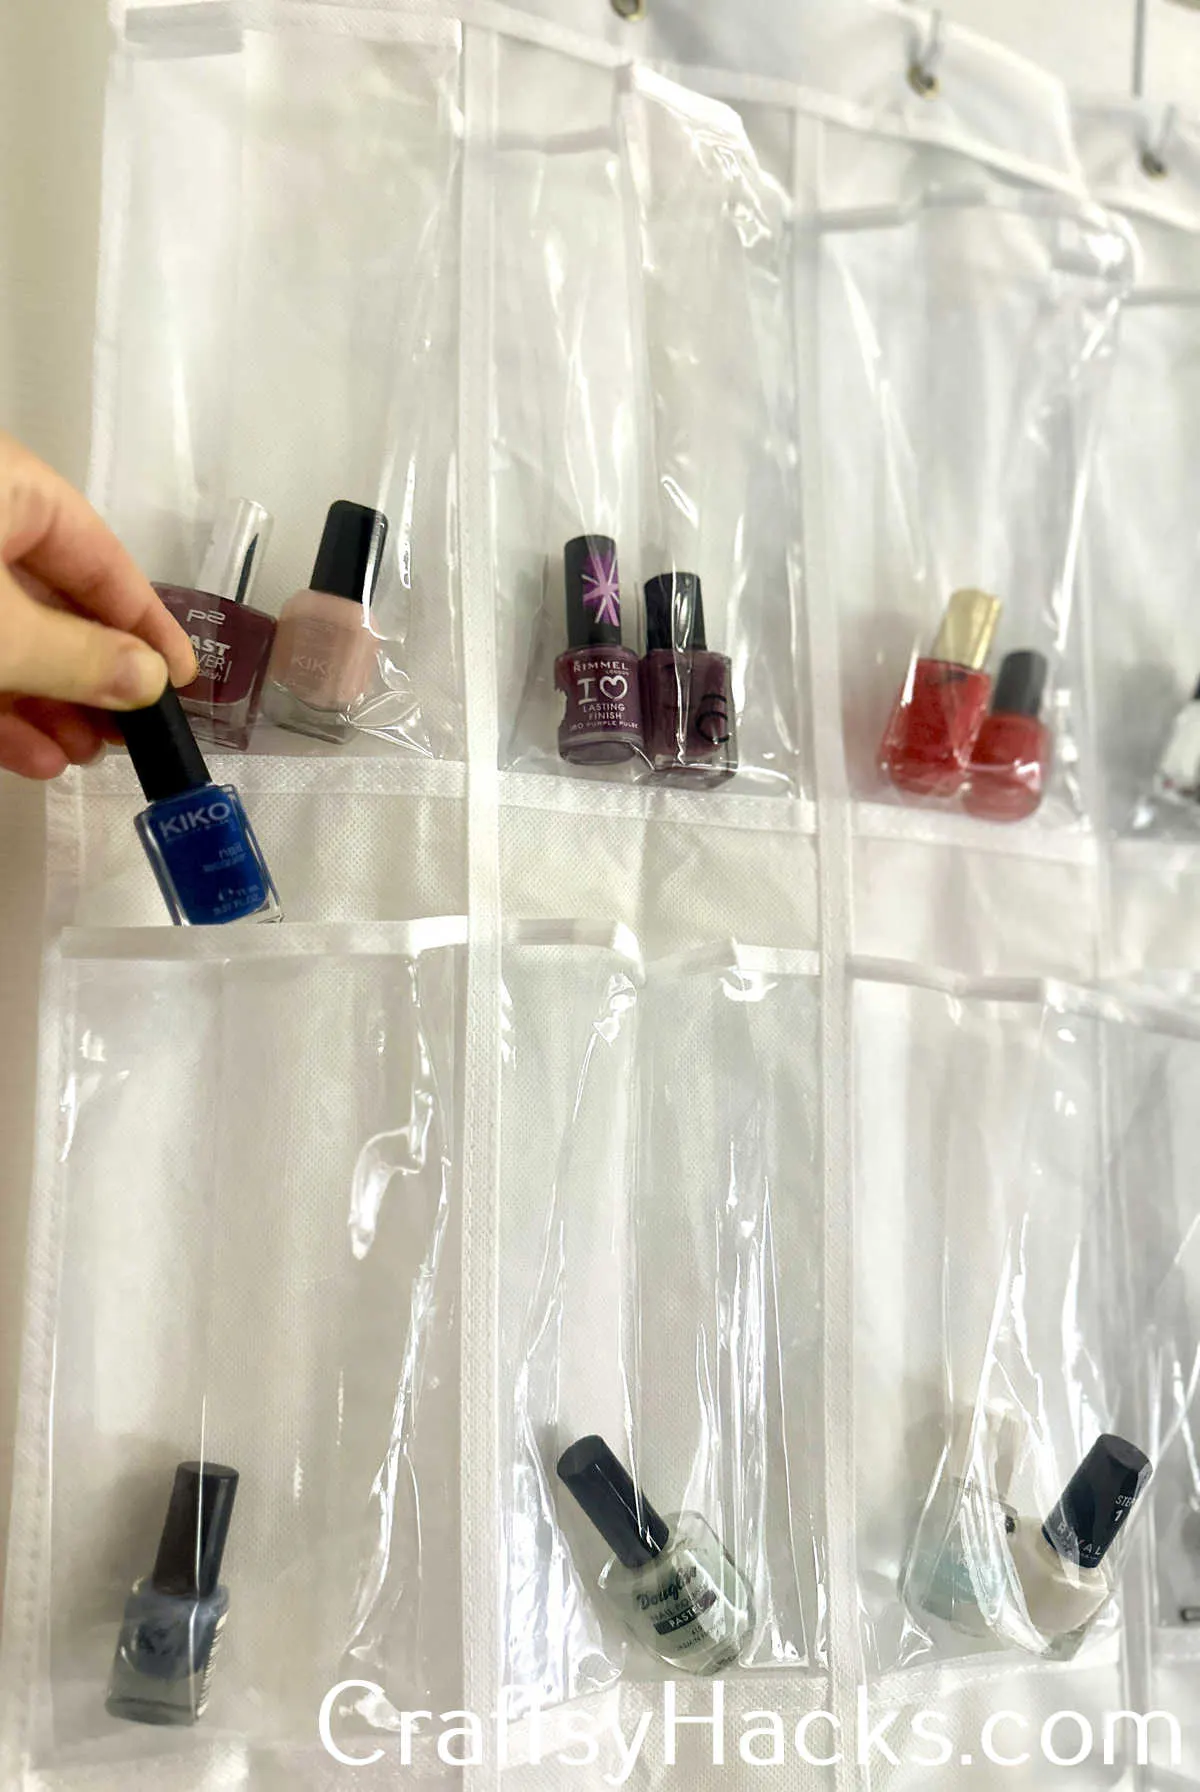 Group Nail Polish by Color in a Shoe Organizer